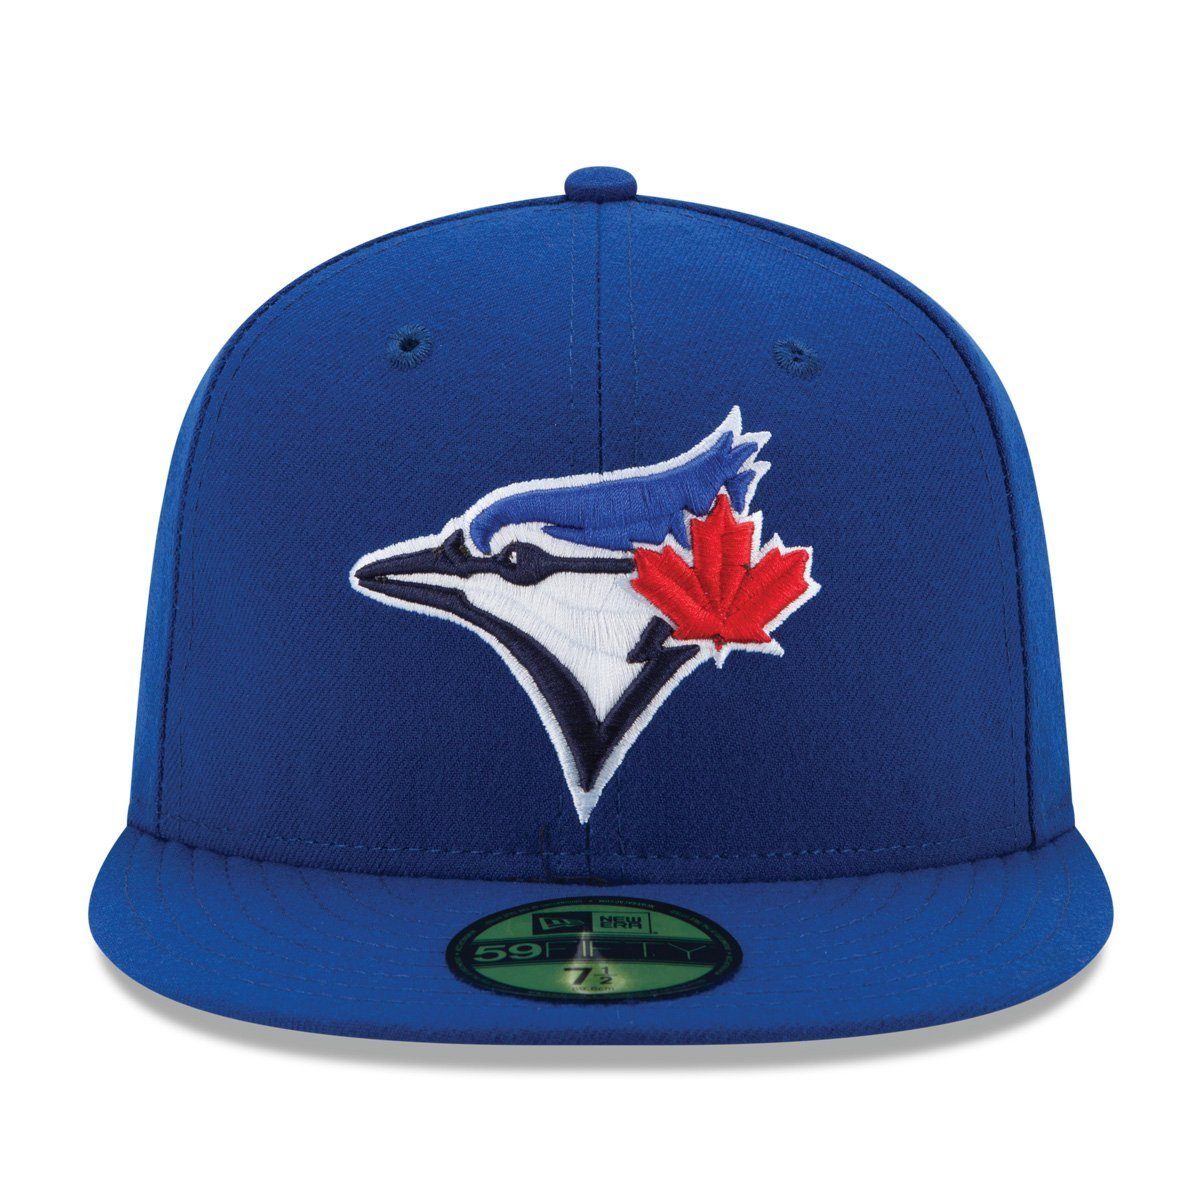 New Fitted Cap Jays Era ONFIELD Toronto 59Fifty AUTHENTIC